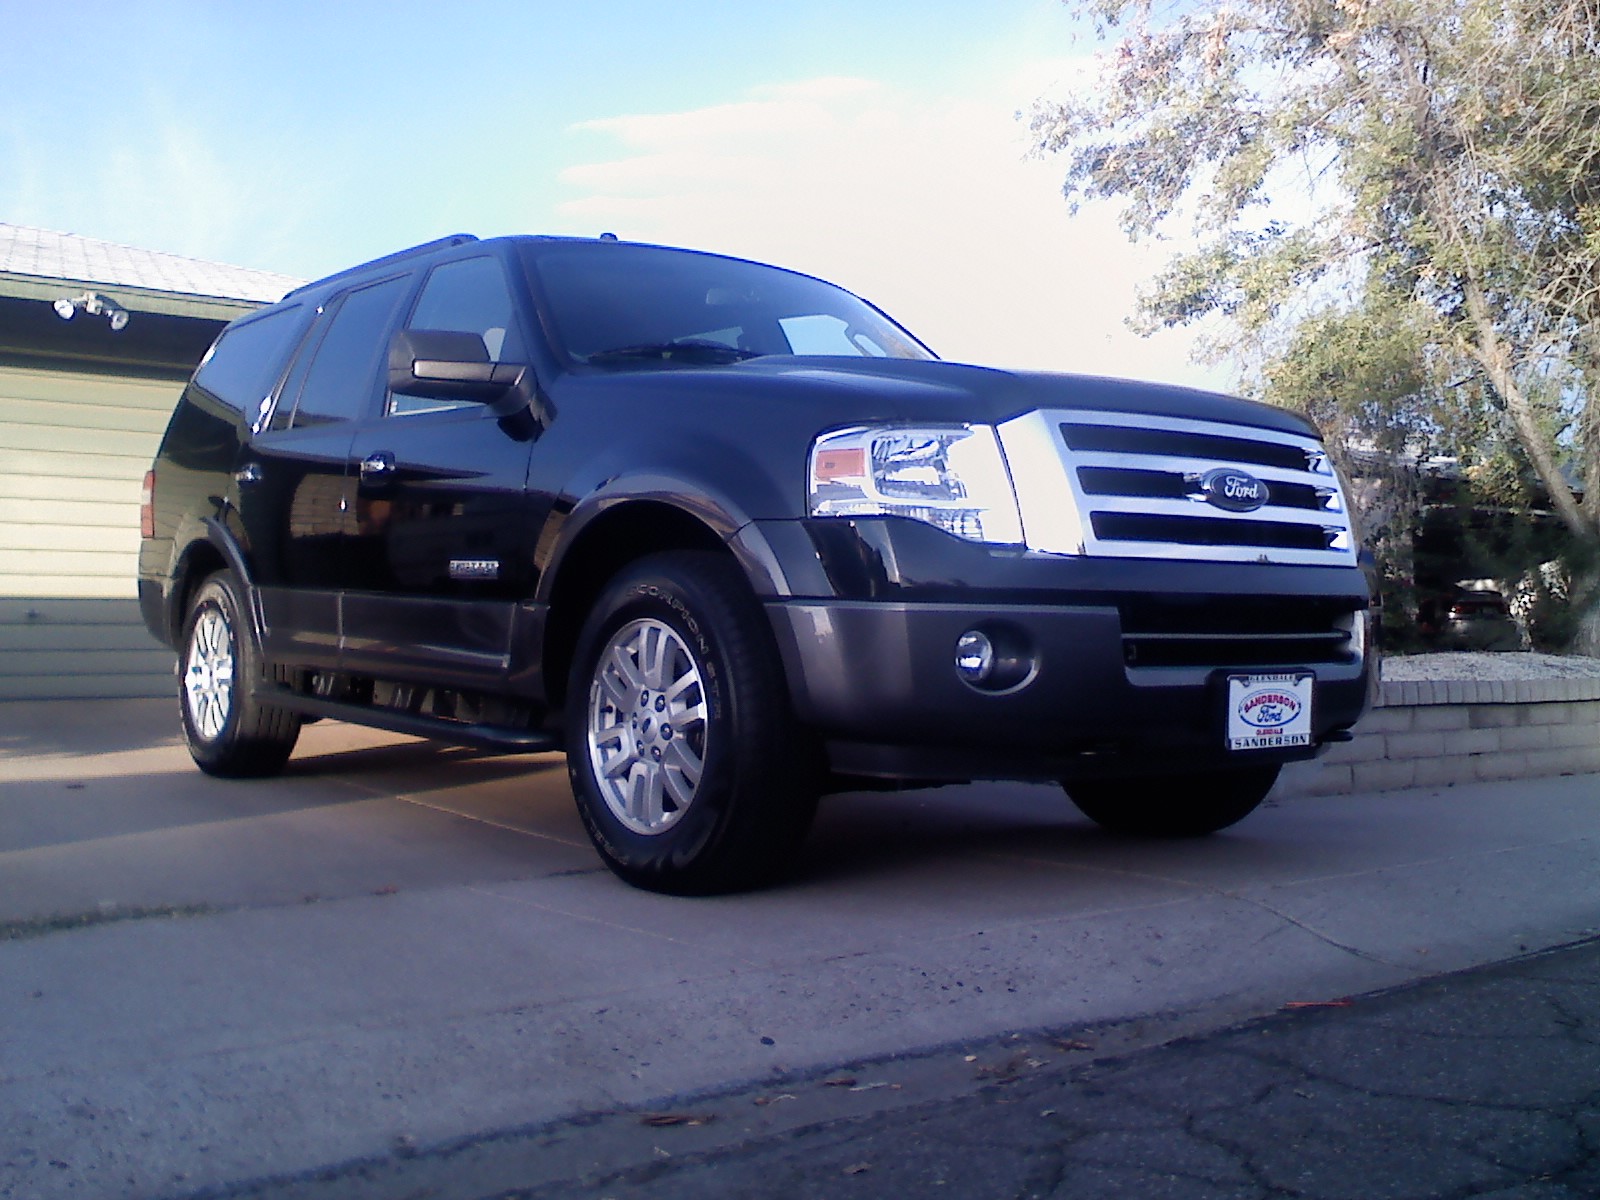 2003 Ford expedition 4x4 review #3